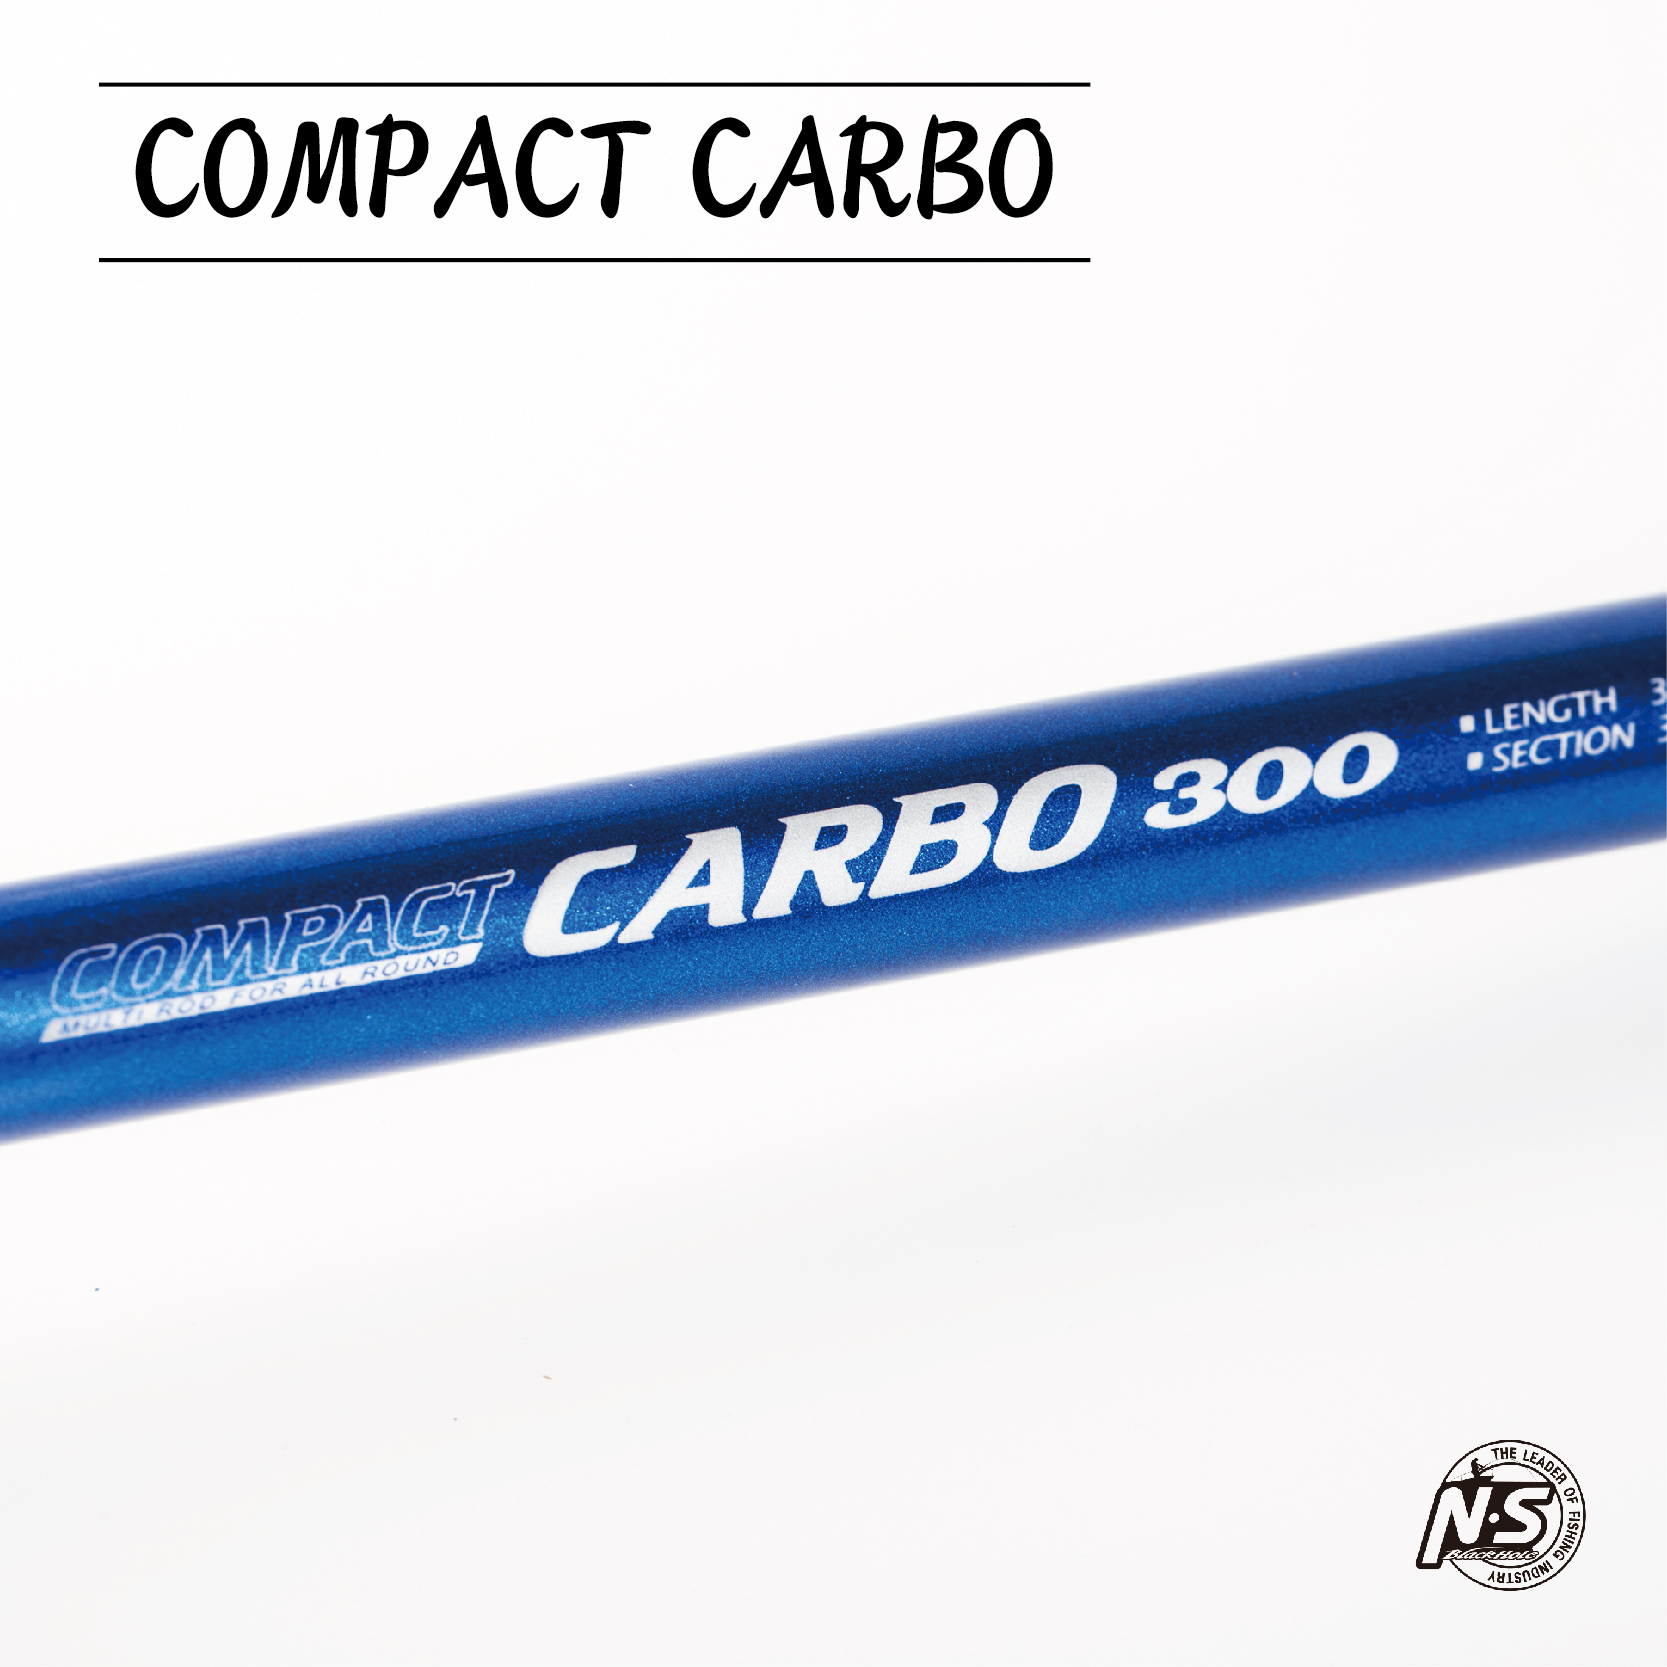 COMPACT CARBO